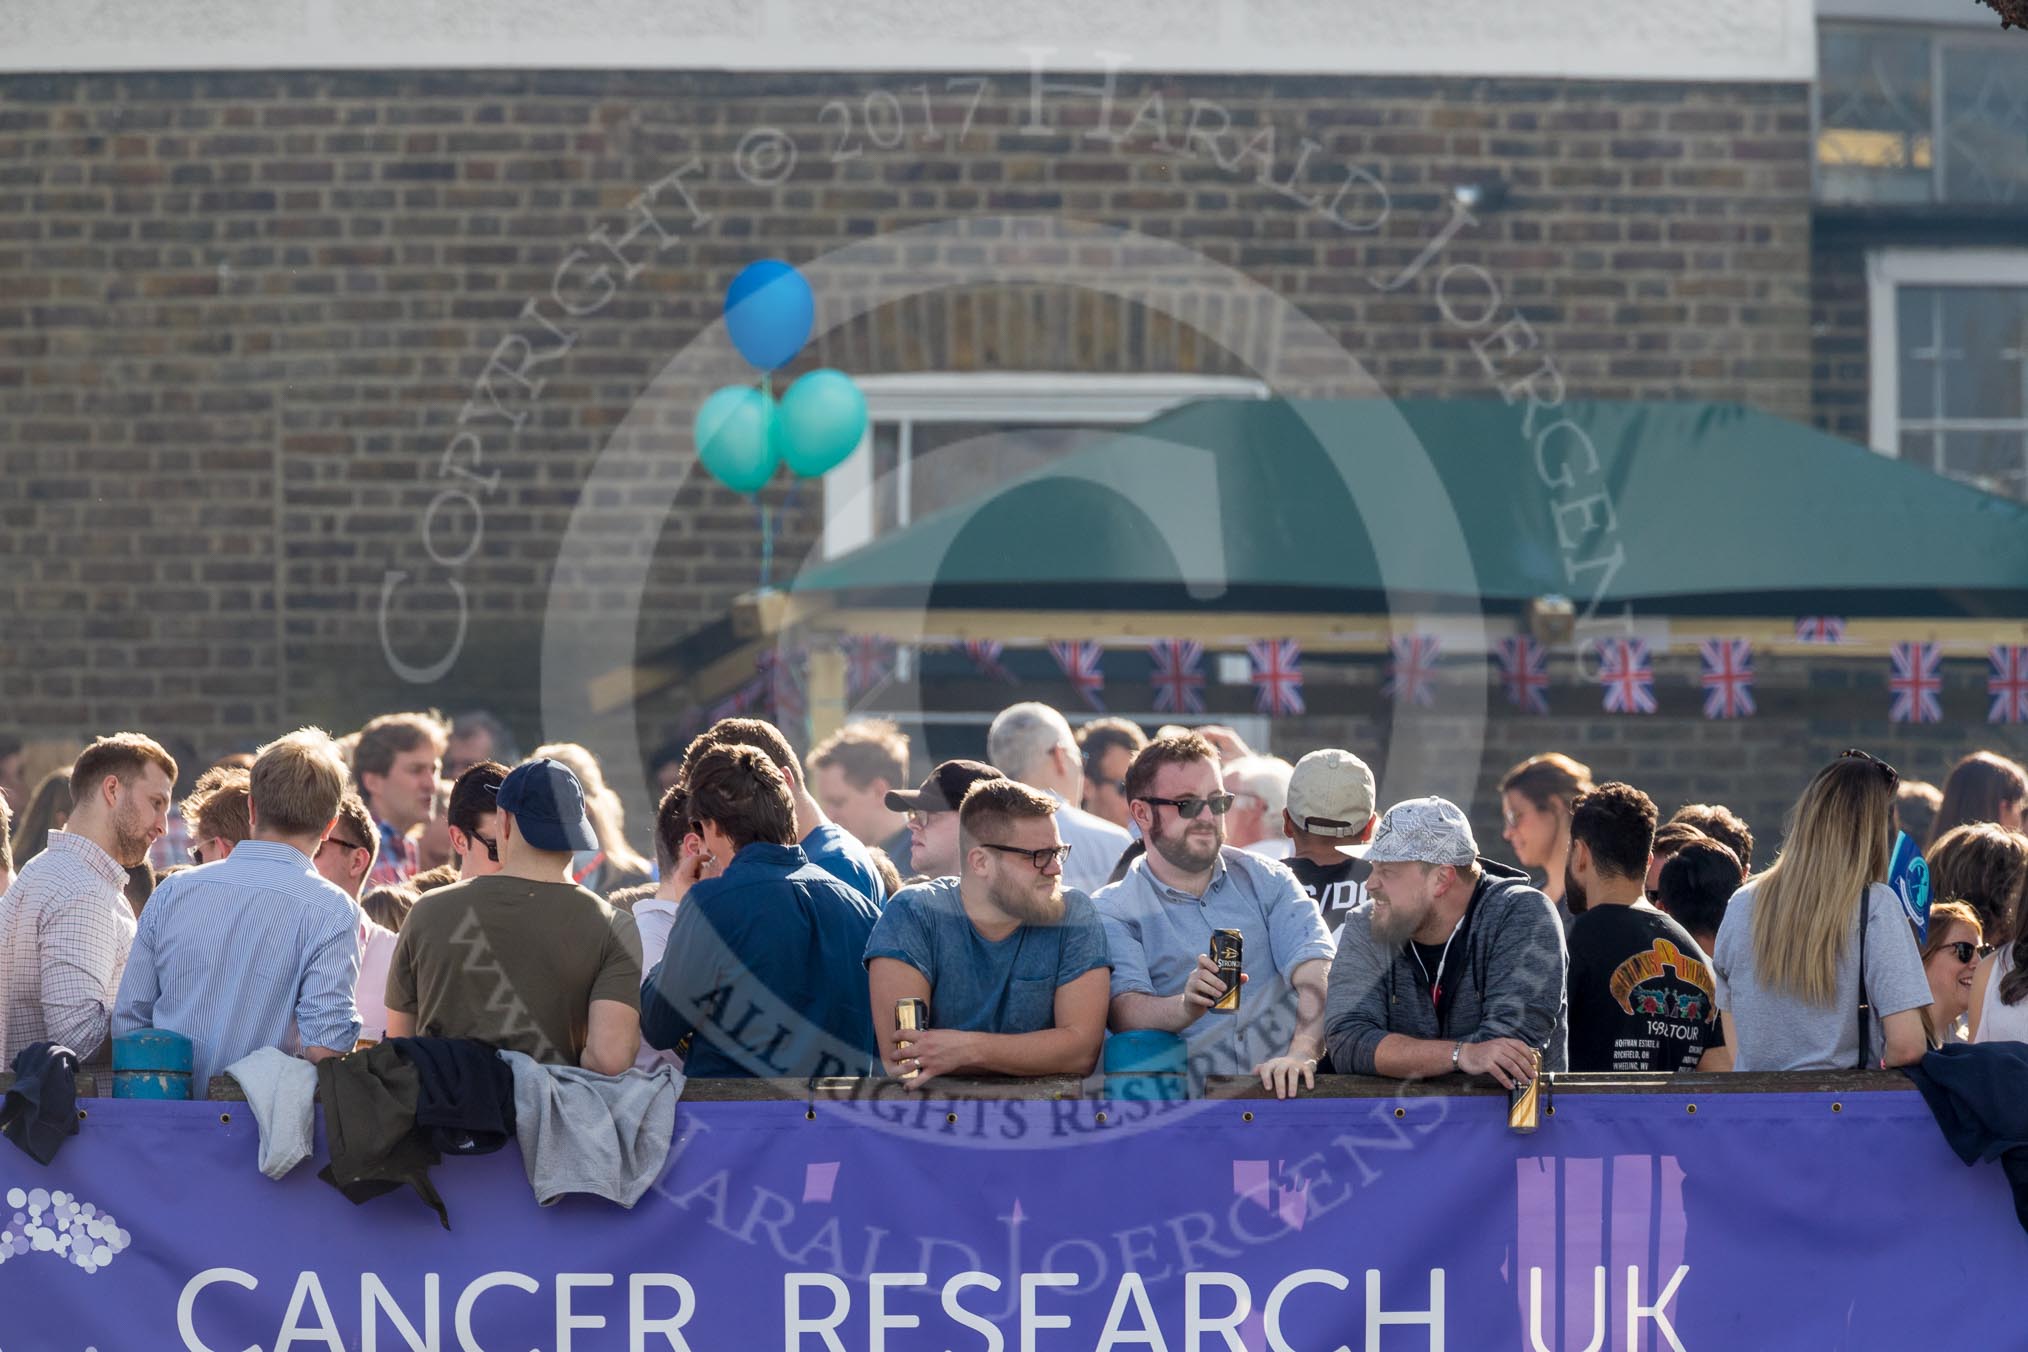 The Boat Race season 2017 -  The Cancer Research Women's Boat Race: Waiting for The Boat Race on a sunny day - spectators at one of the riverside pubs in Putney.
River Thames between Putney Bridge and Mortlake,
London SW15,

United Kingdom,
on 02 April 2017 at 16:06, image #98